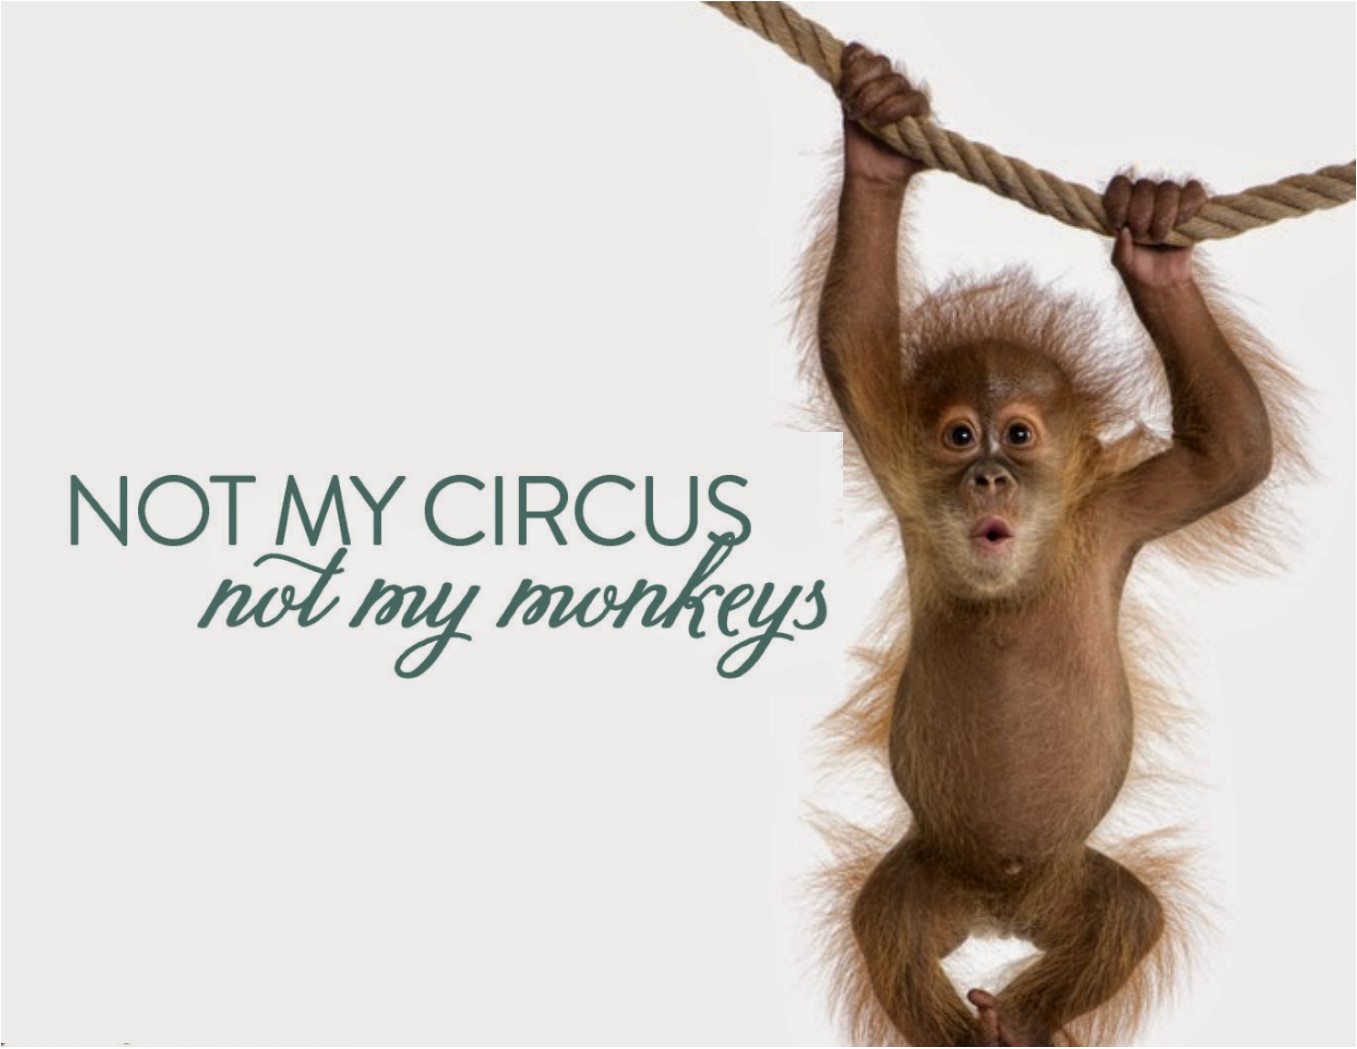 Not My Circus, Not My Monkeys by Lesli Berry